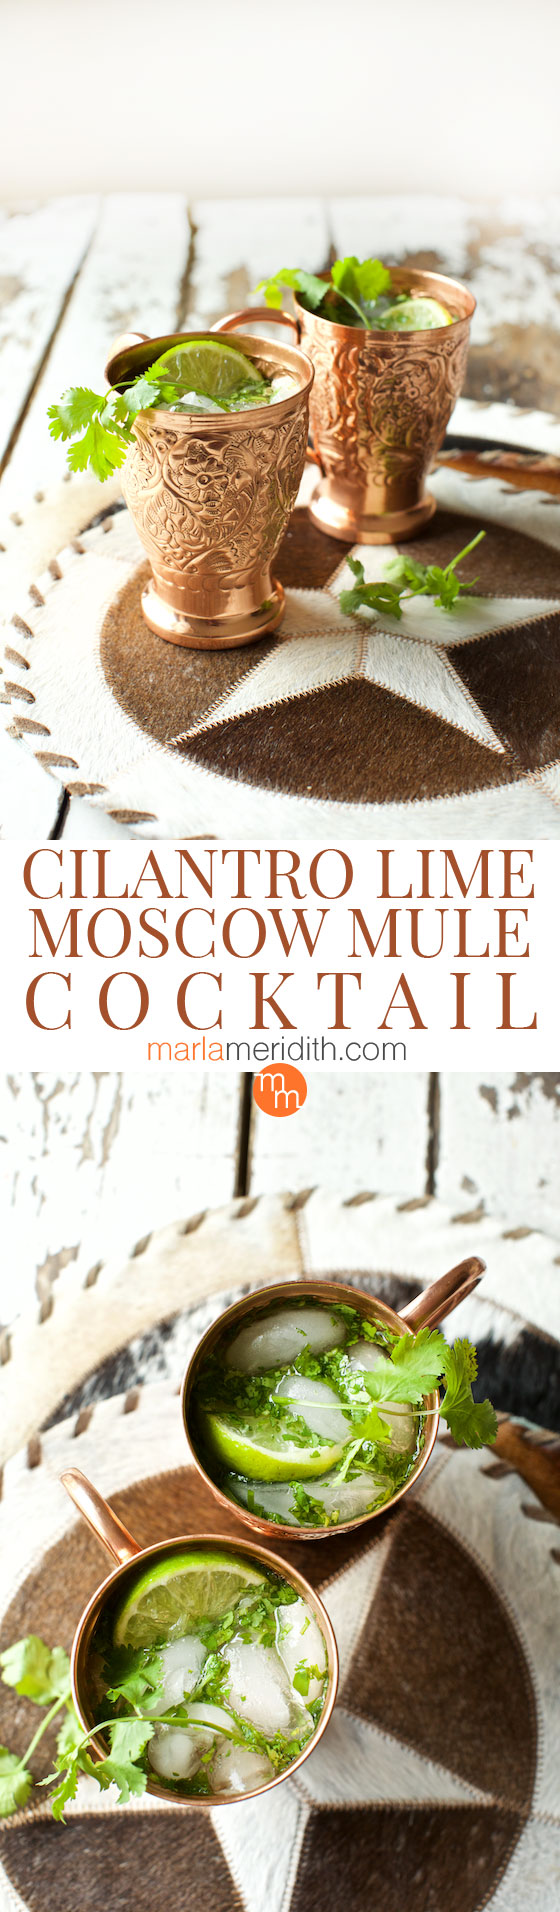 Cilantro Lime Moscow Mule Cocktail recipe, a refreshing drink for Cinco de Mayo & backyard BBQ's. MarlaMeridith.com ( @marlameridith )